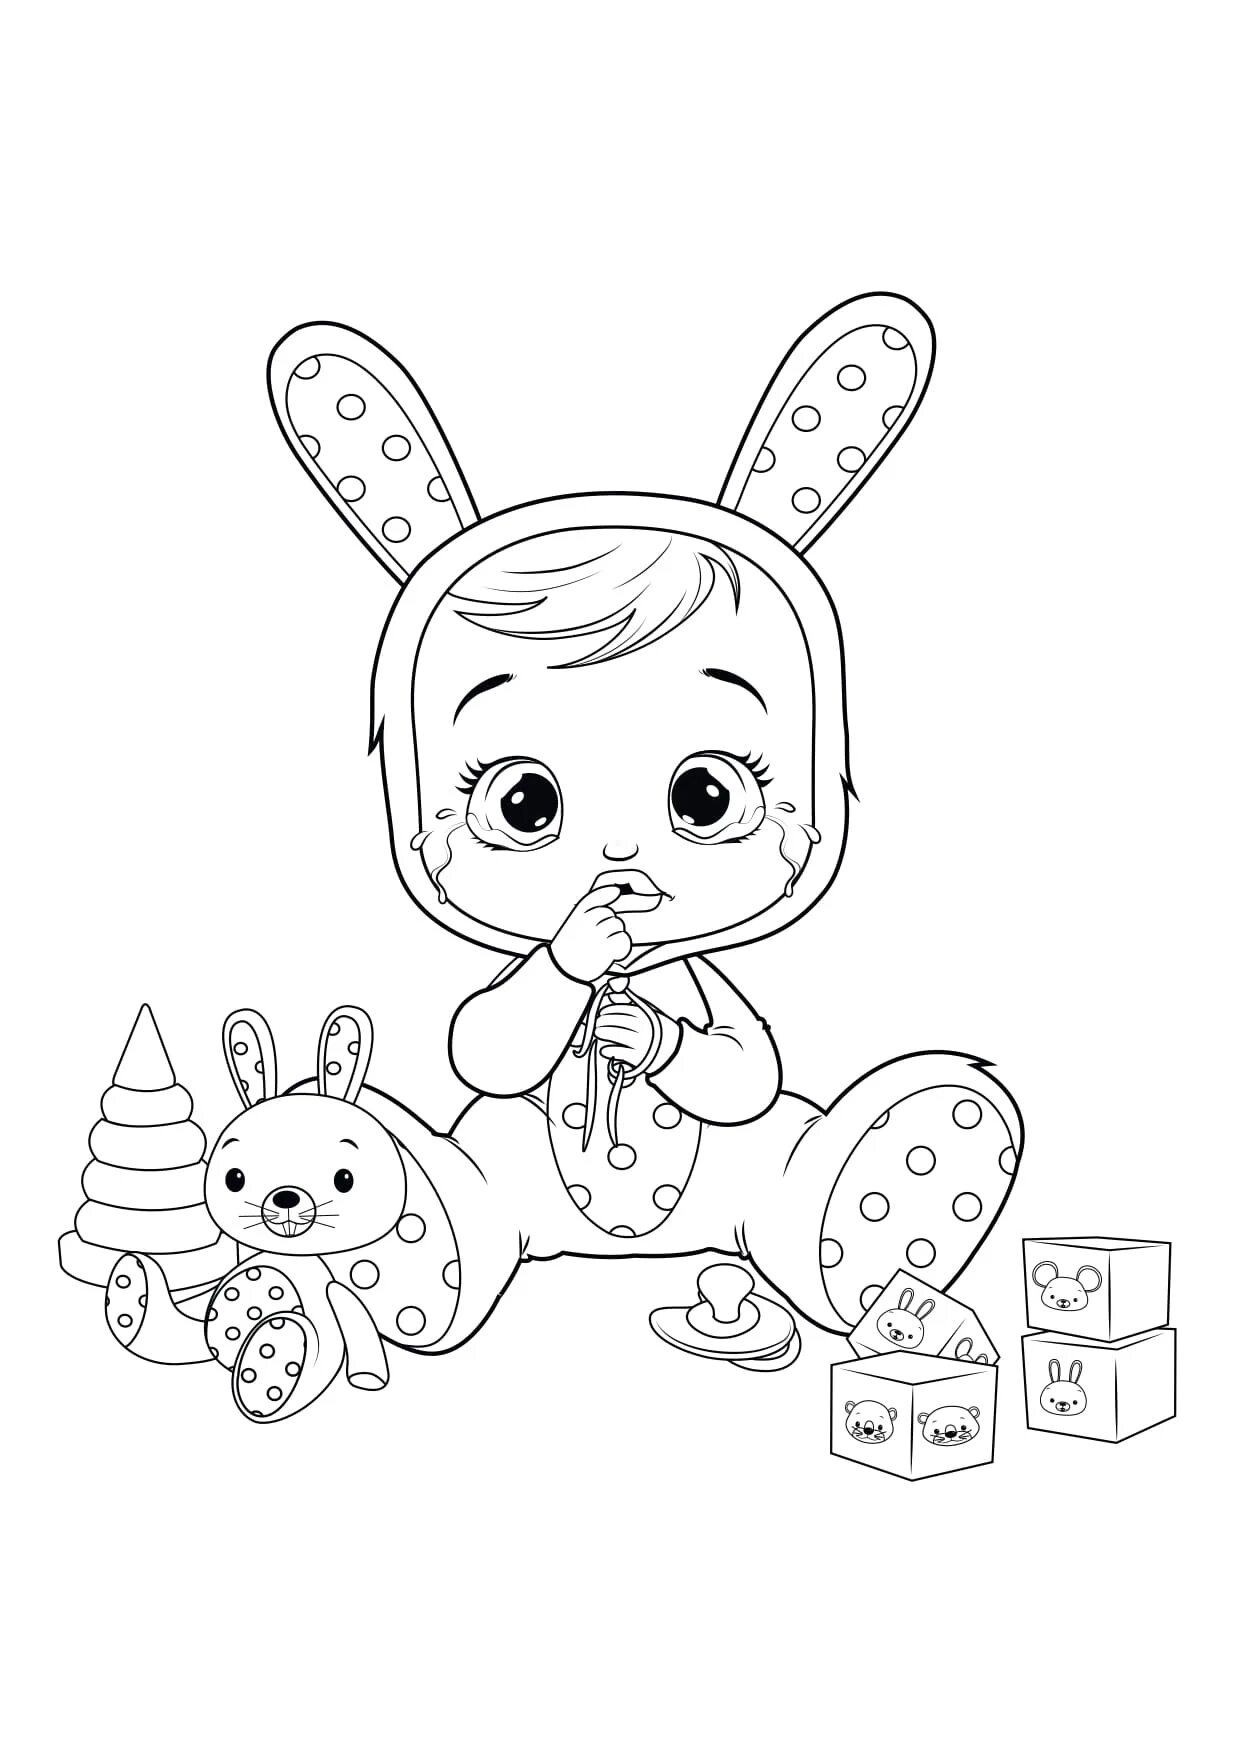 Fantastic baby's edge coloring book for kids